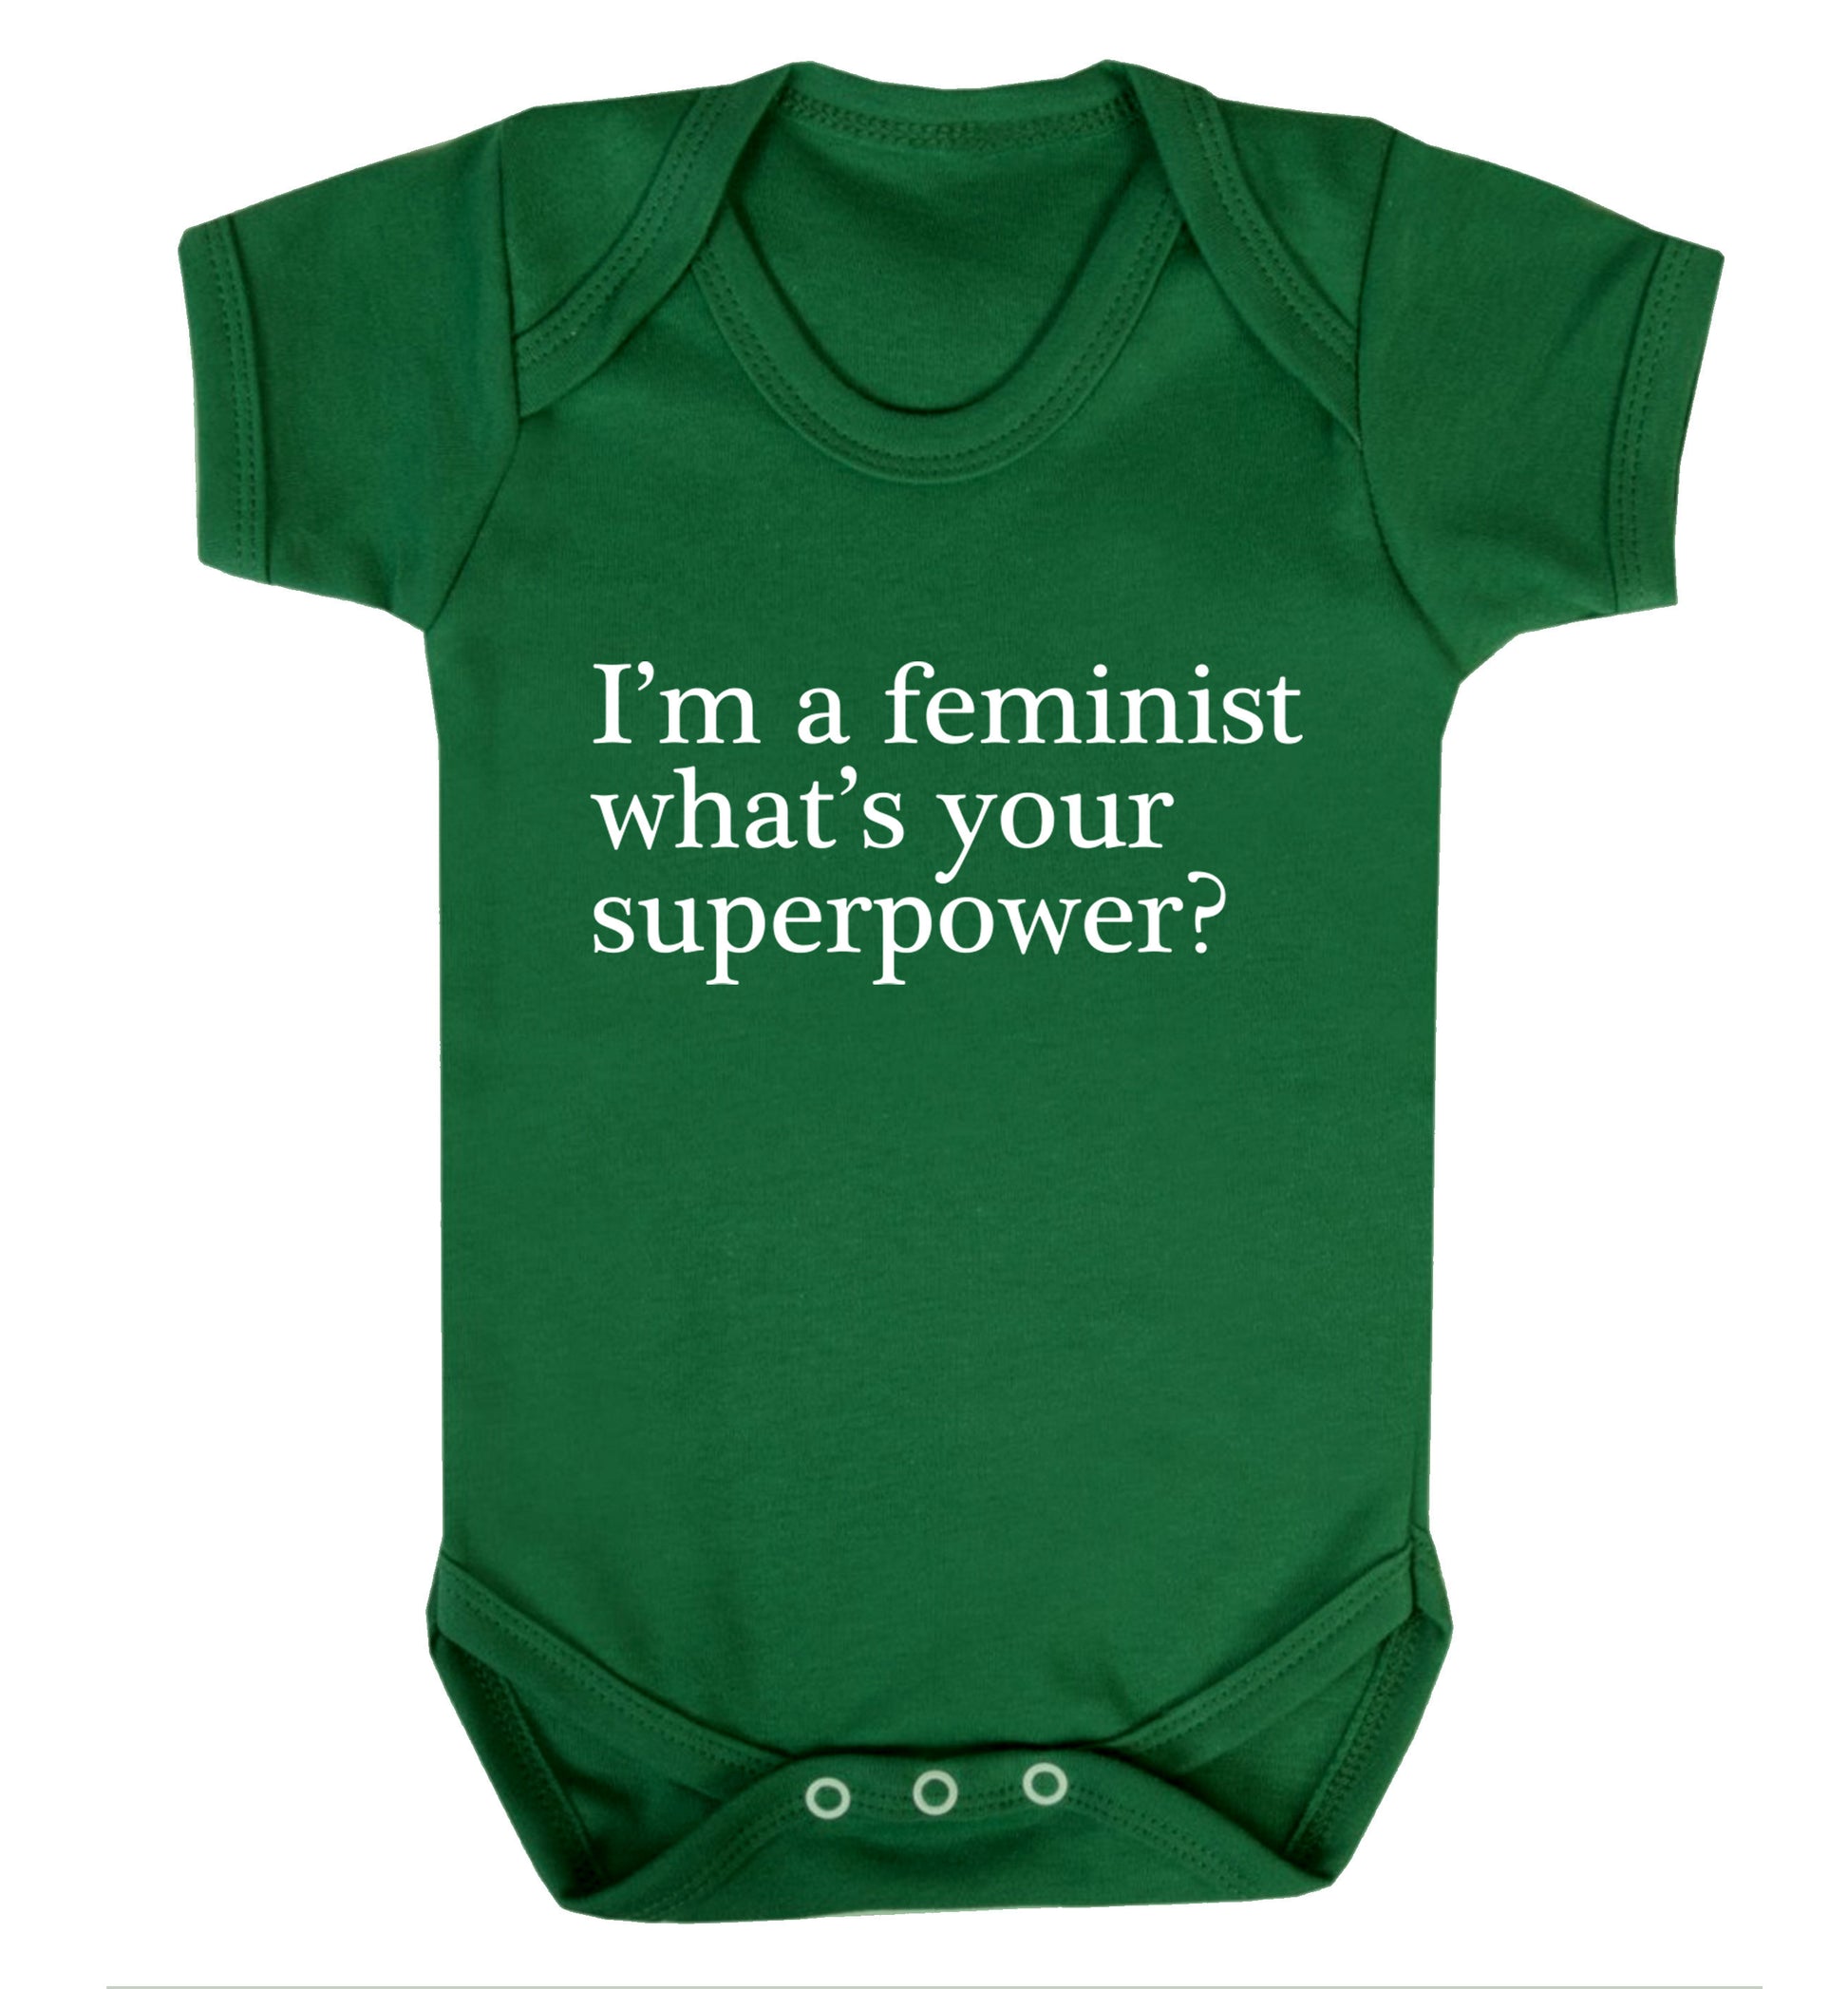 I'm a feminist what's your superpower? Baby Vest green 18-24 months